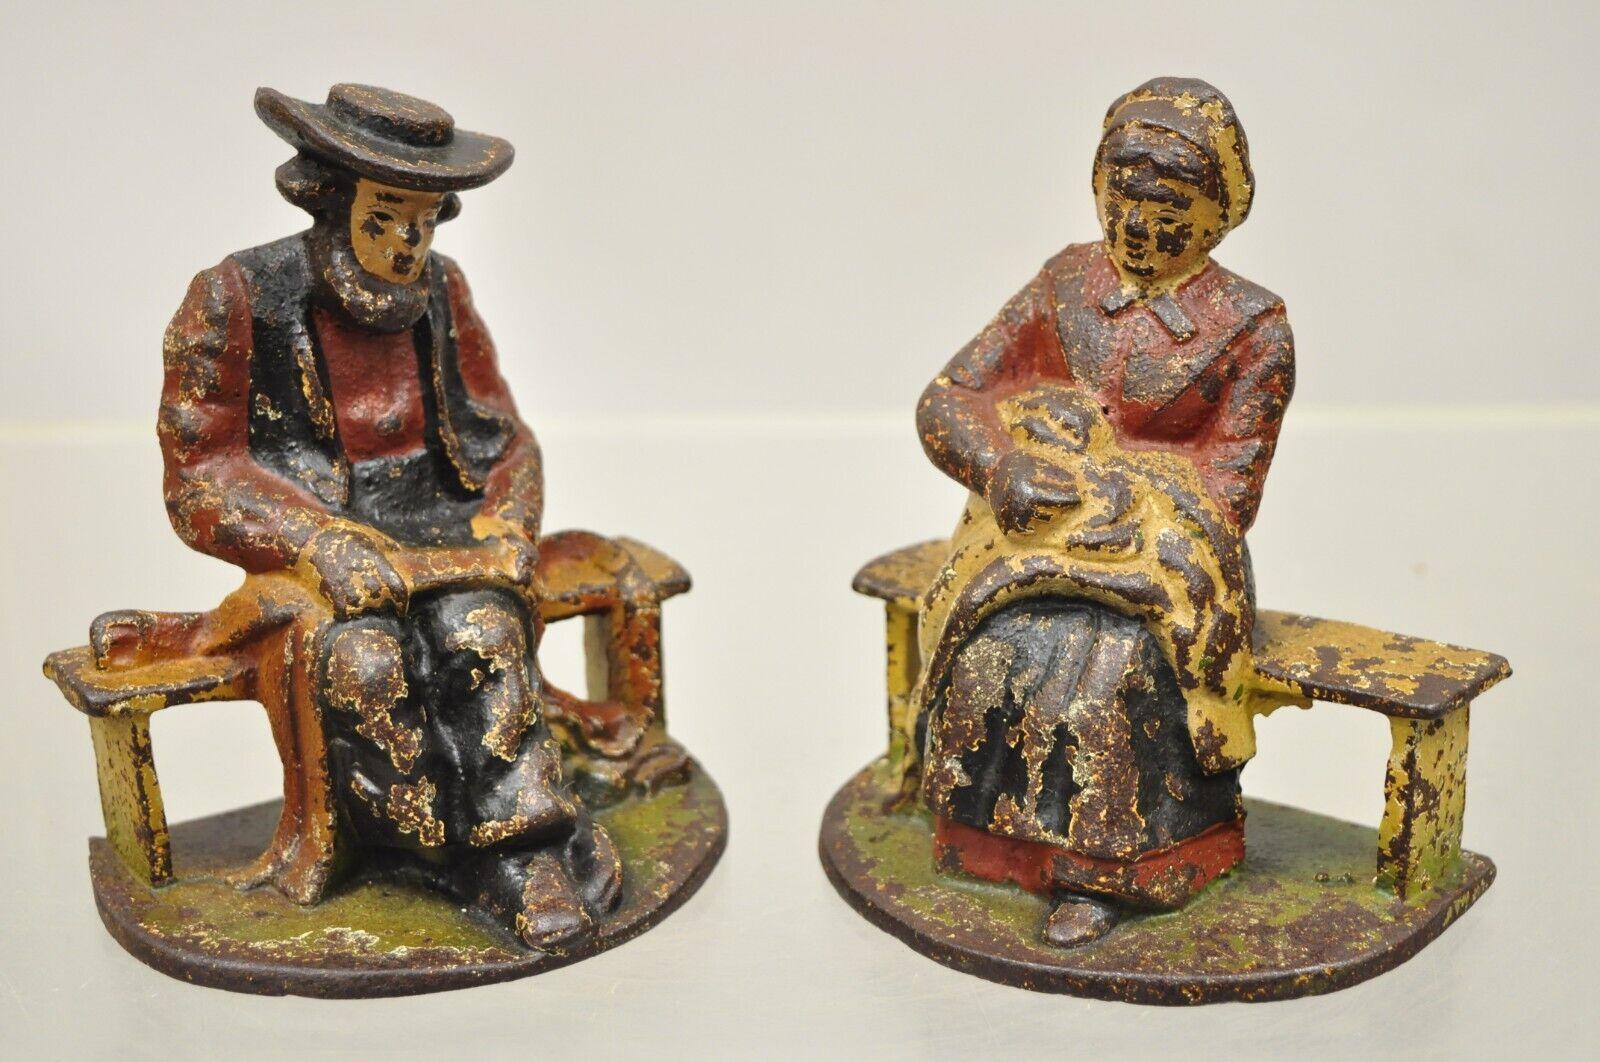 Antique cast iron Amish man and woman couple bookends - a pair. Item features nice small size, original distressed paint, very nice antique pair. Circa early 1900s. Measurements: 4.5